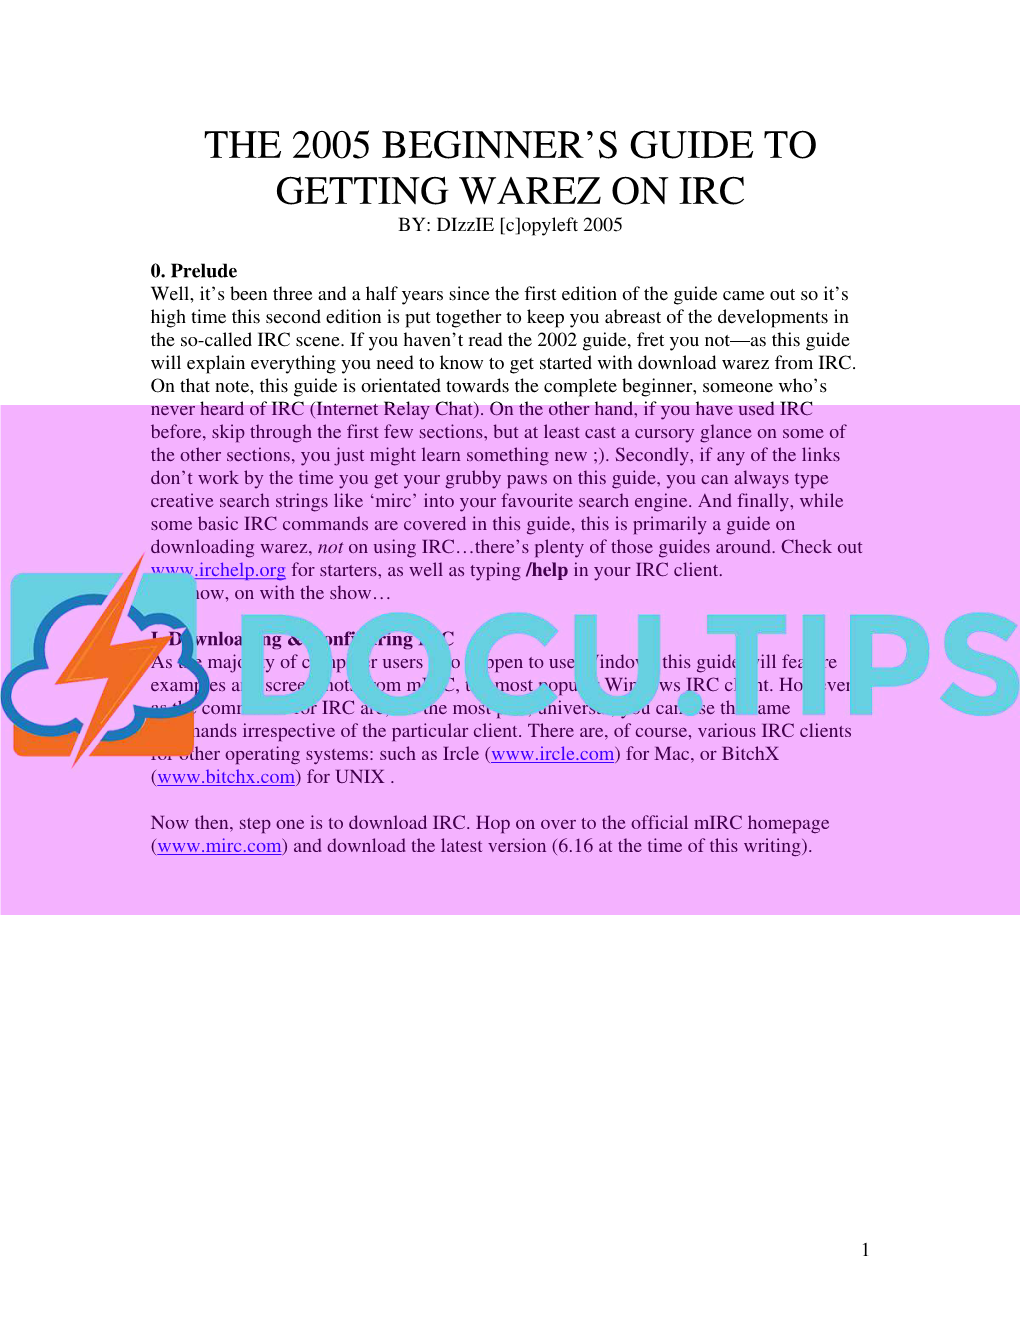 S GUIDE to GETTING WAREZ on IRC BY: Dizzie [C]Opyleft 2005